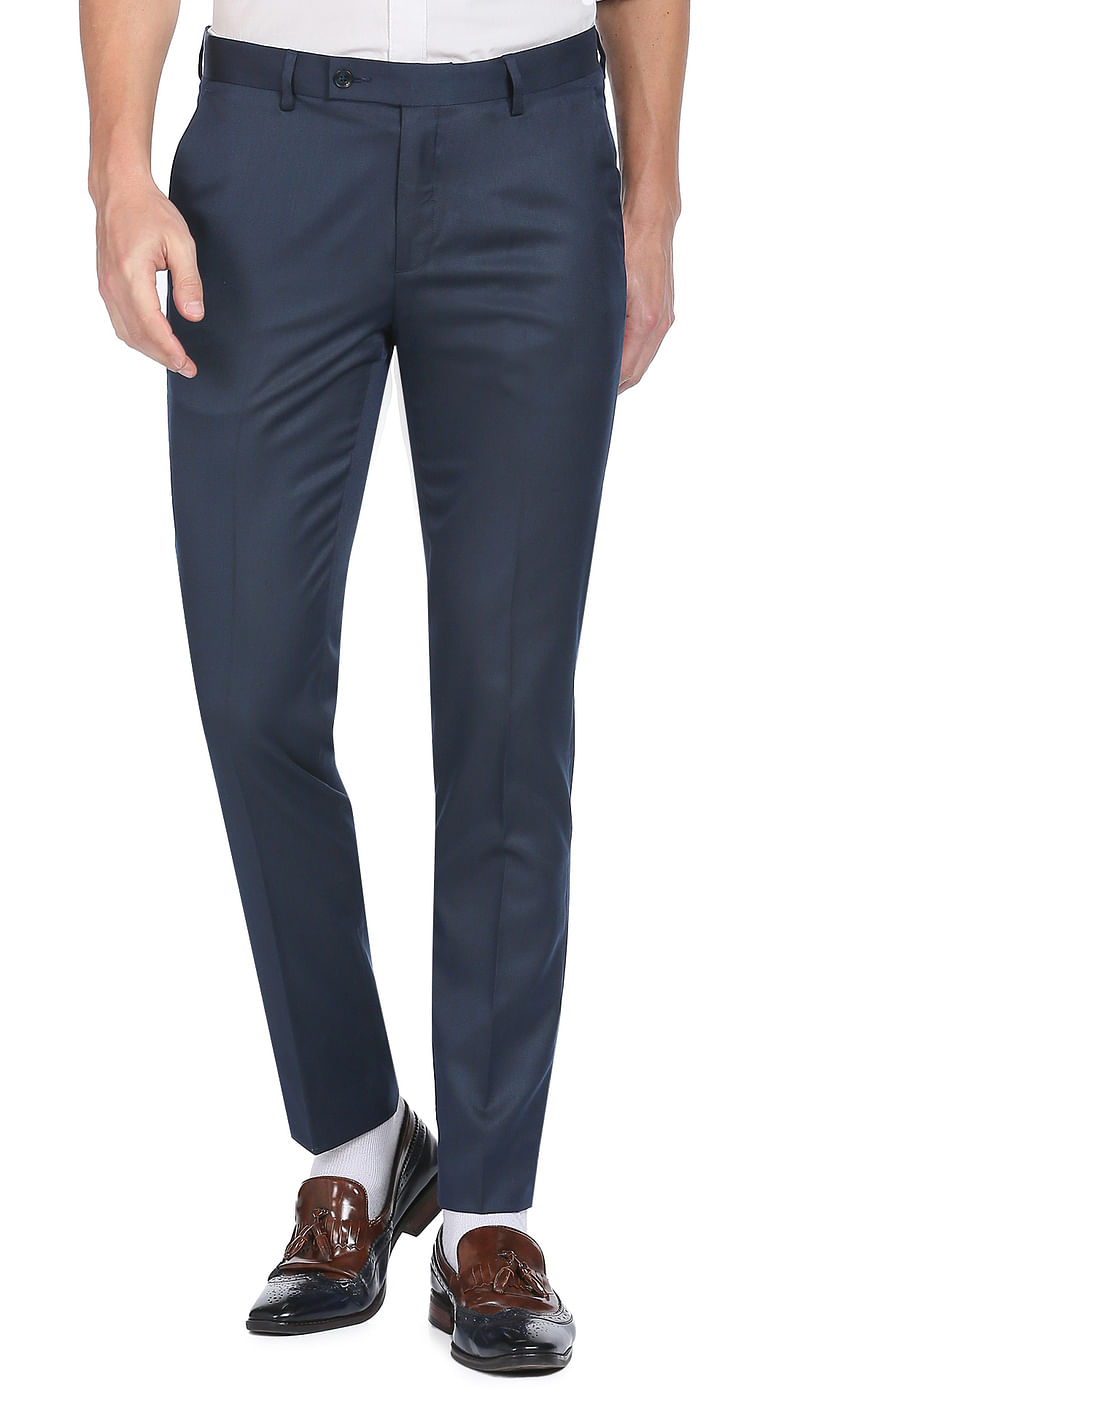 Men's Trousers | Casual Trousers for Men | New Look